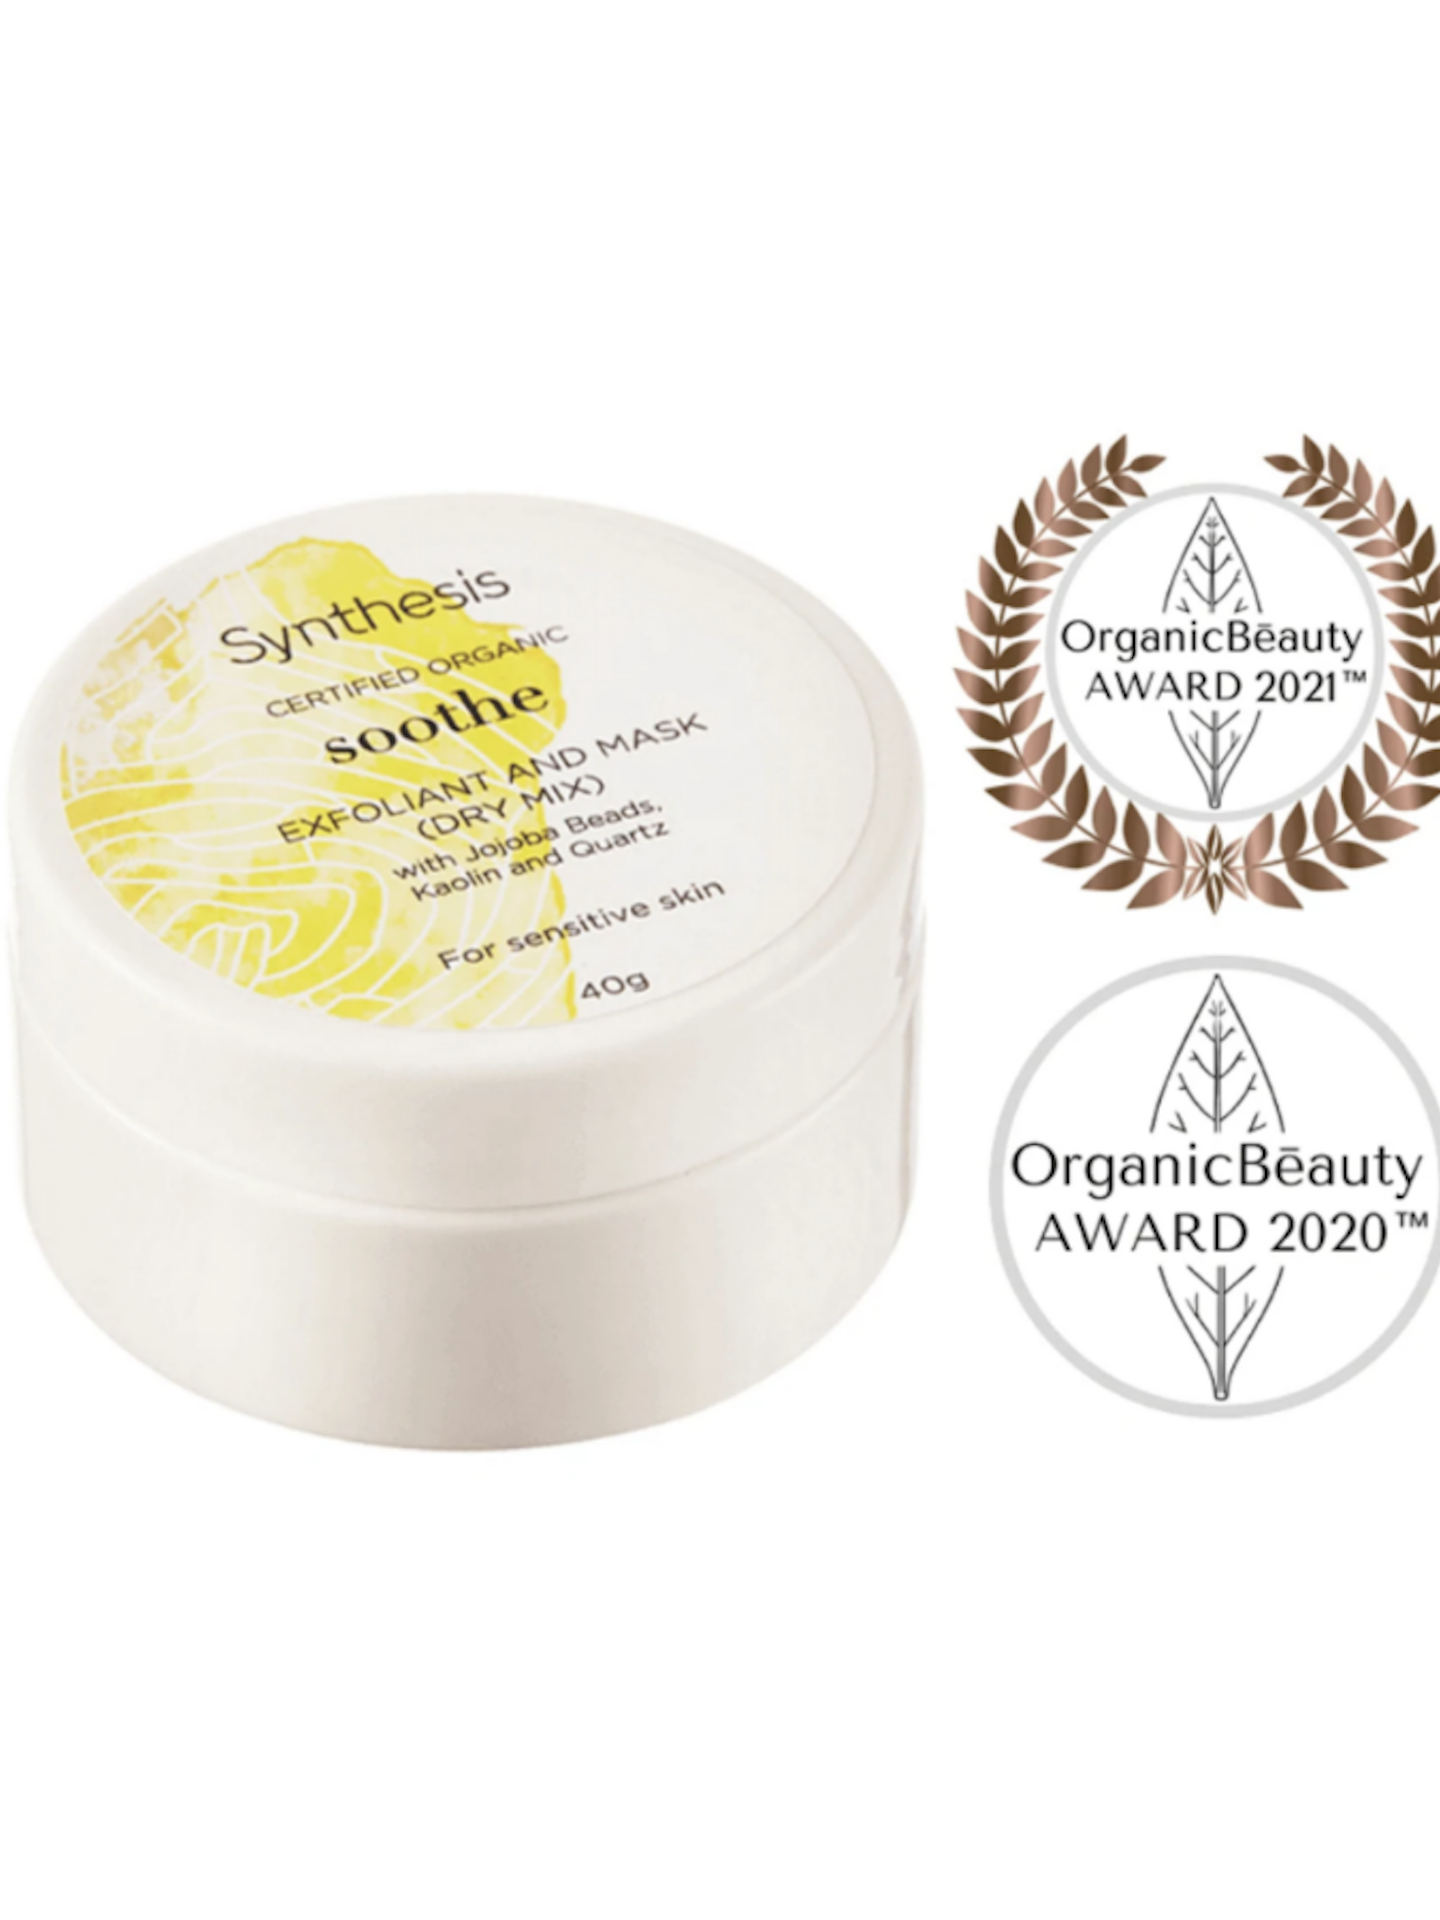 synthesis organics soothe dry exfoliant and mask